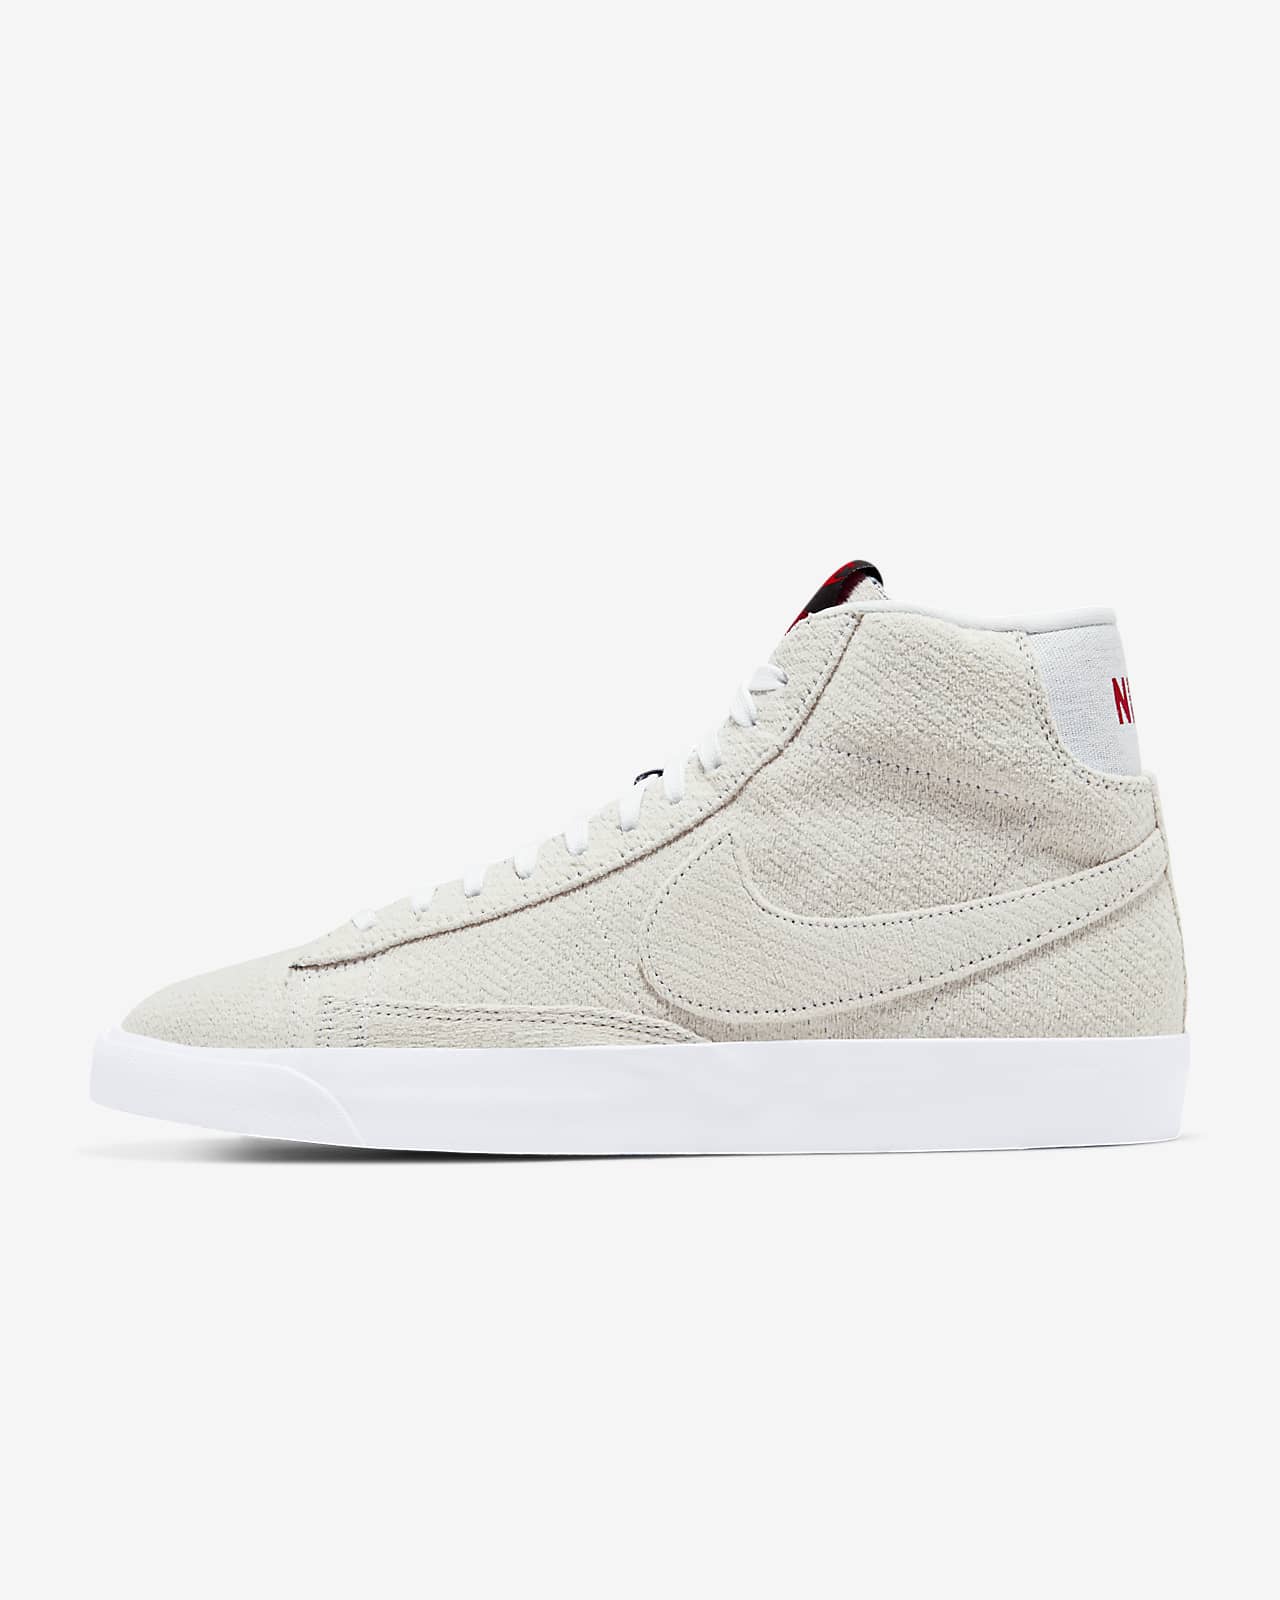 nike stranger things shoes for sale